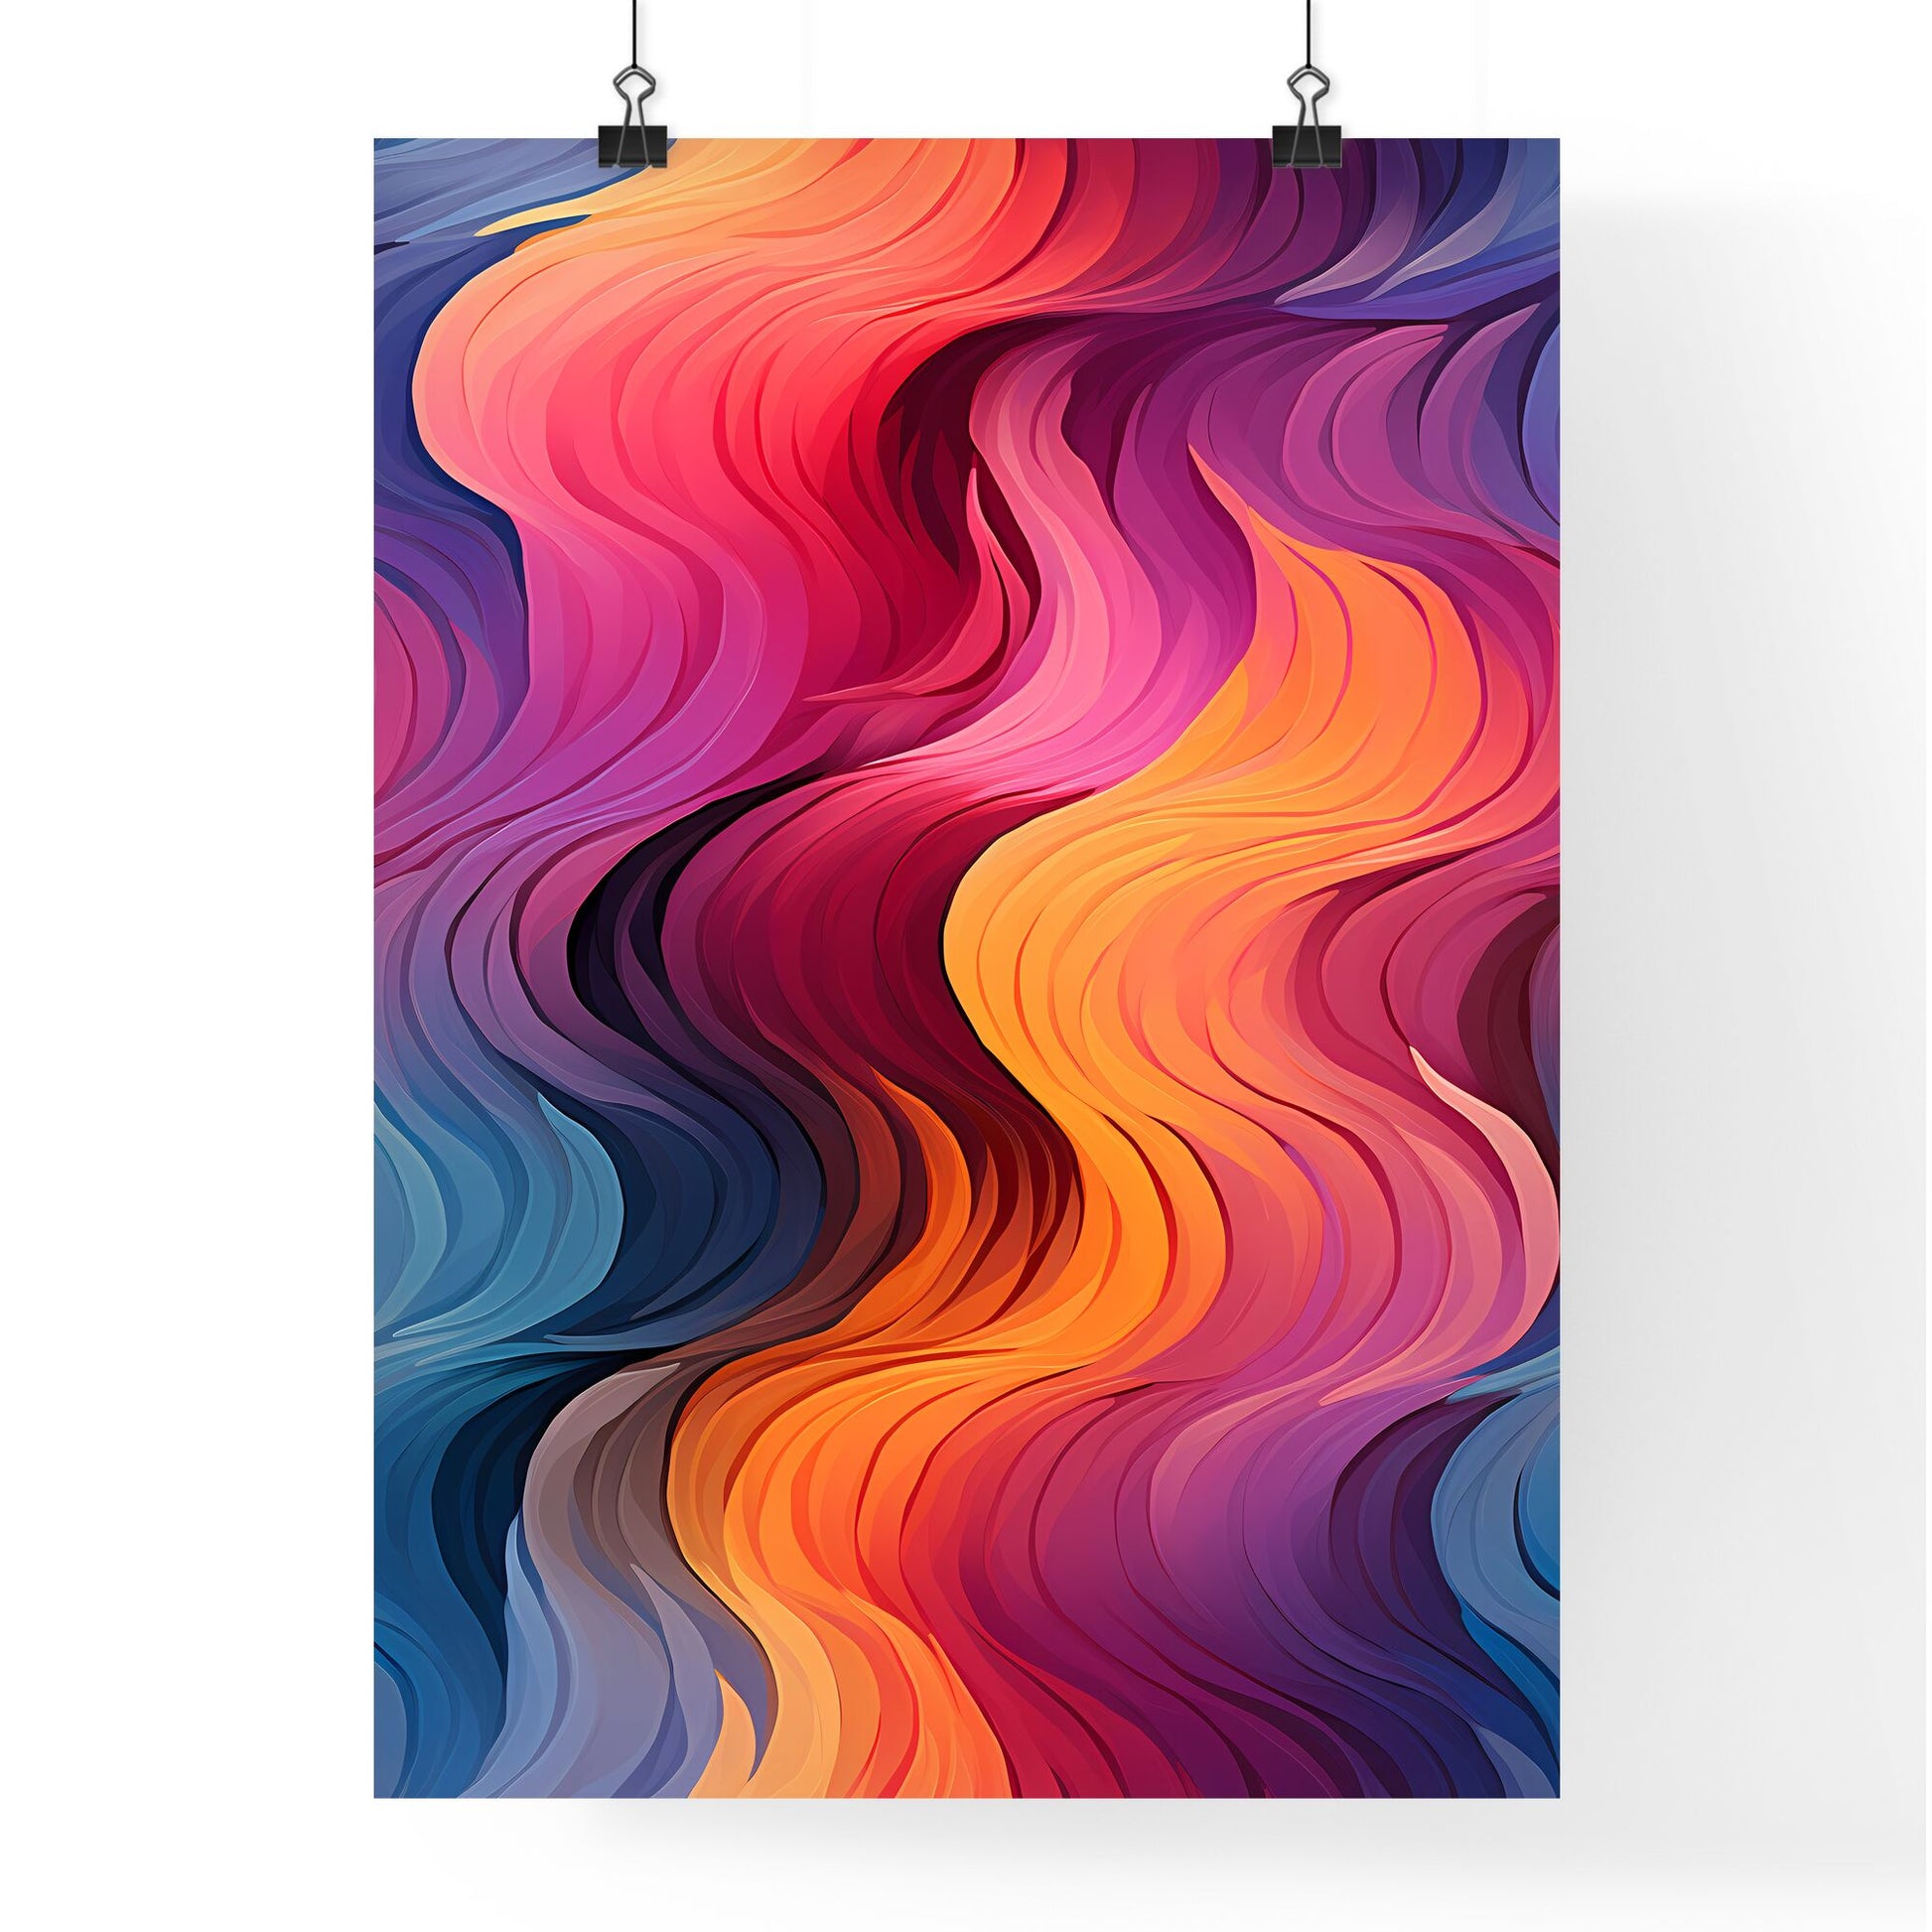 Colorful Geometric Seamless Repetitive Curvy Waves - A Colorful